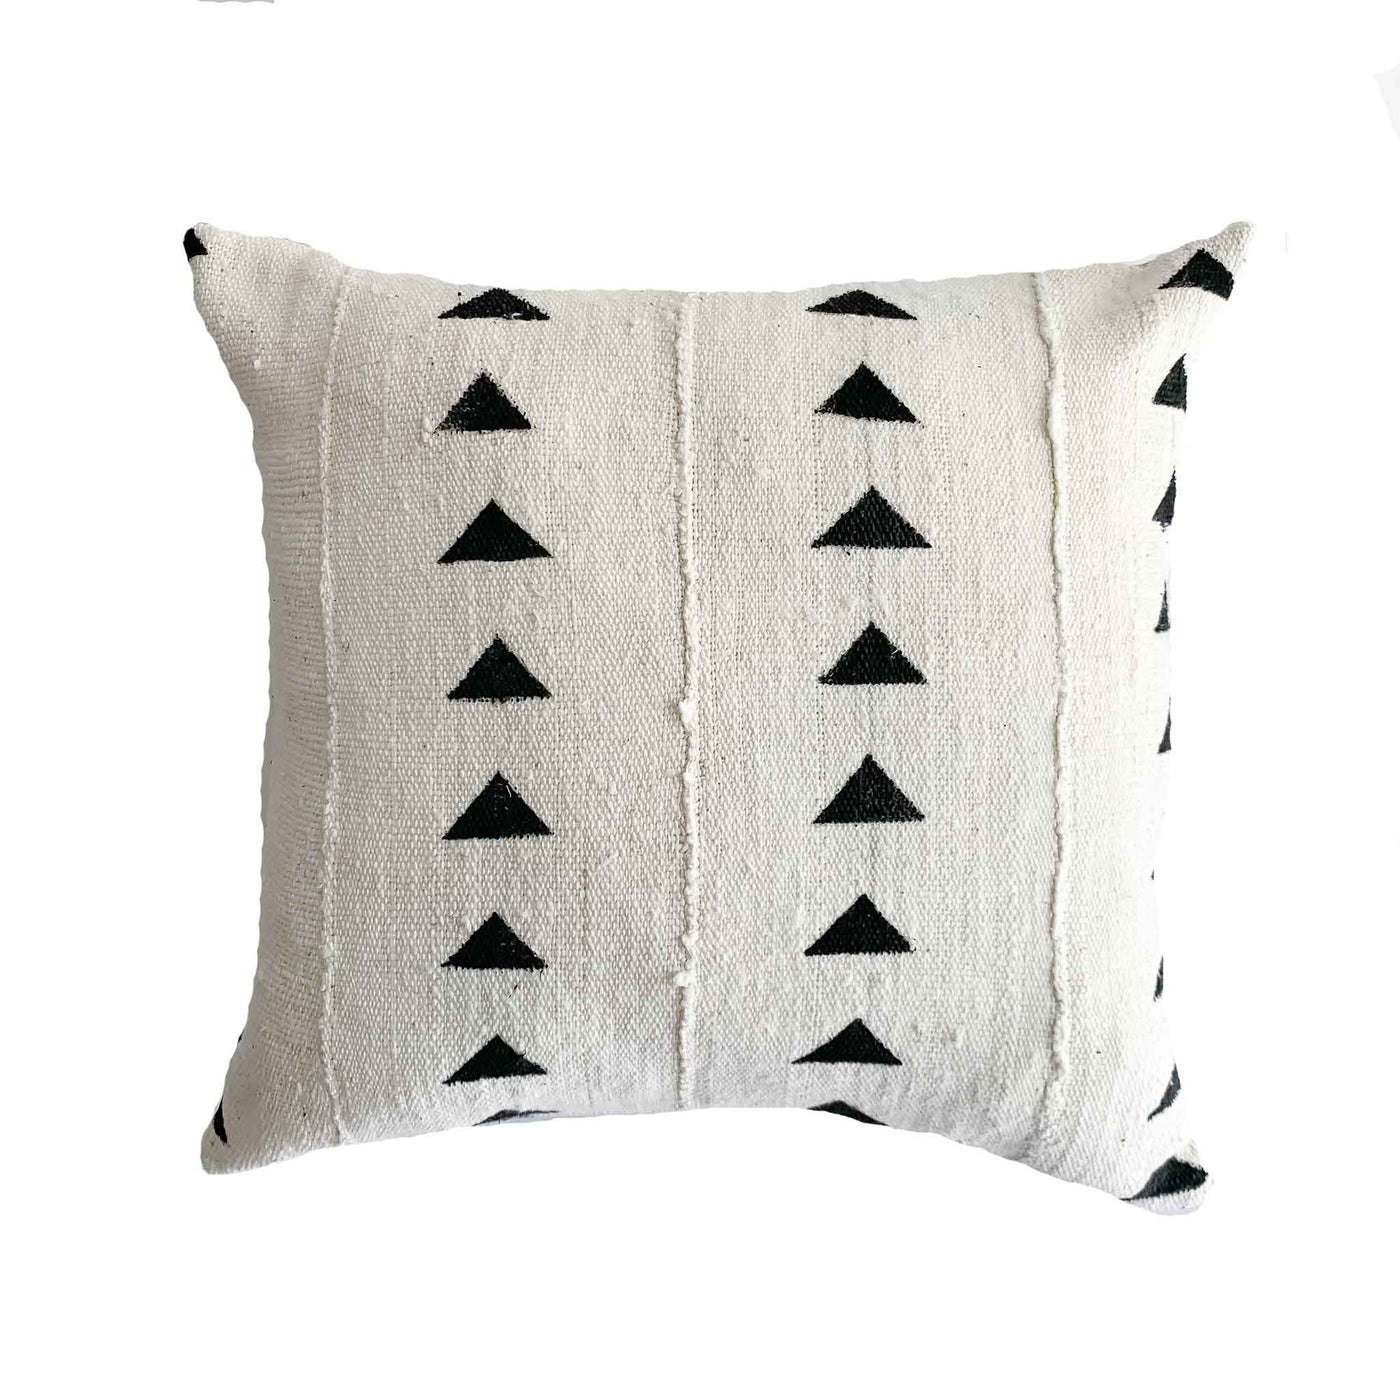 Authentic Mud Cloth | Triangle, Black and White - Studio Pillows